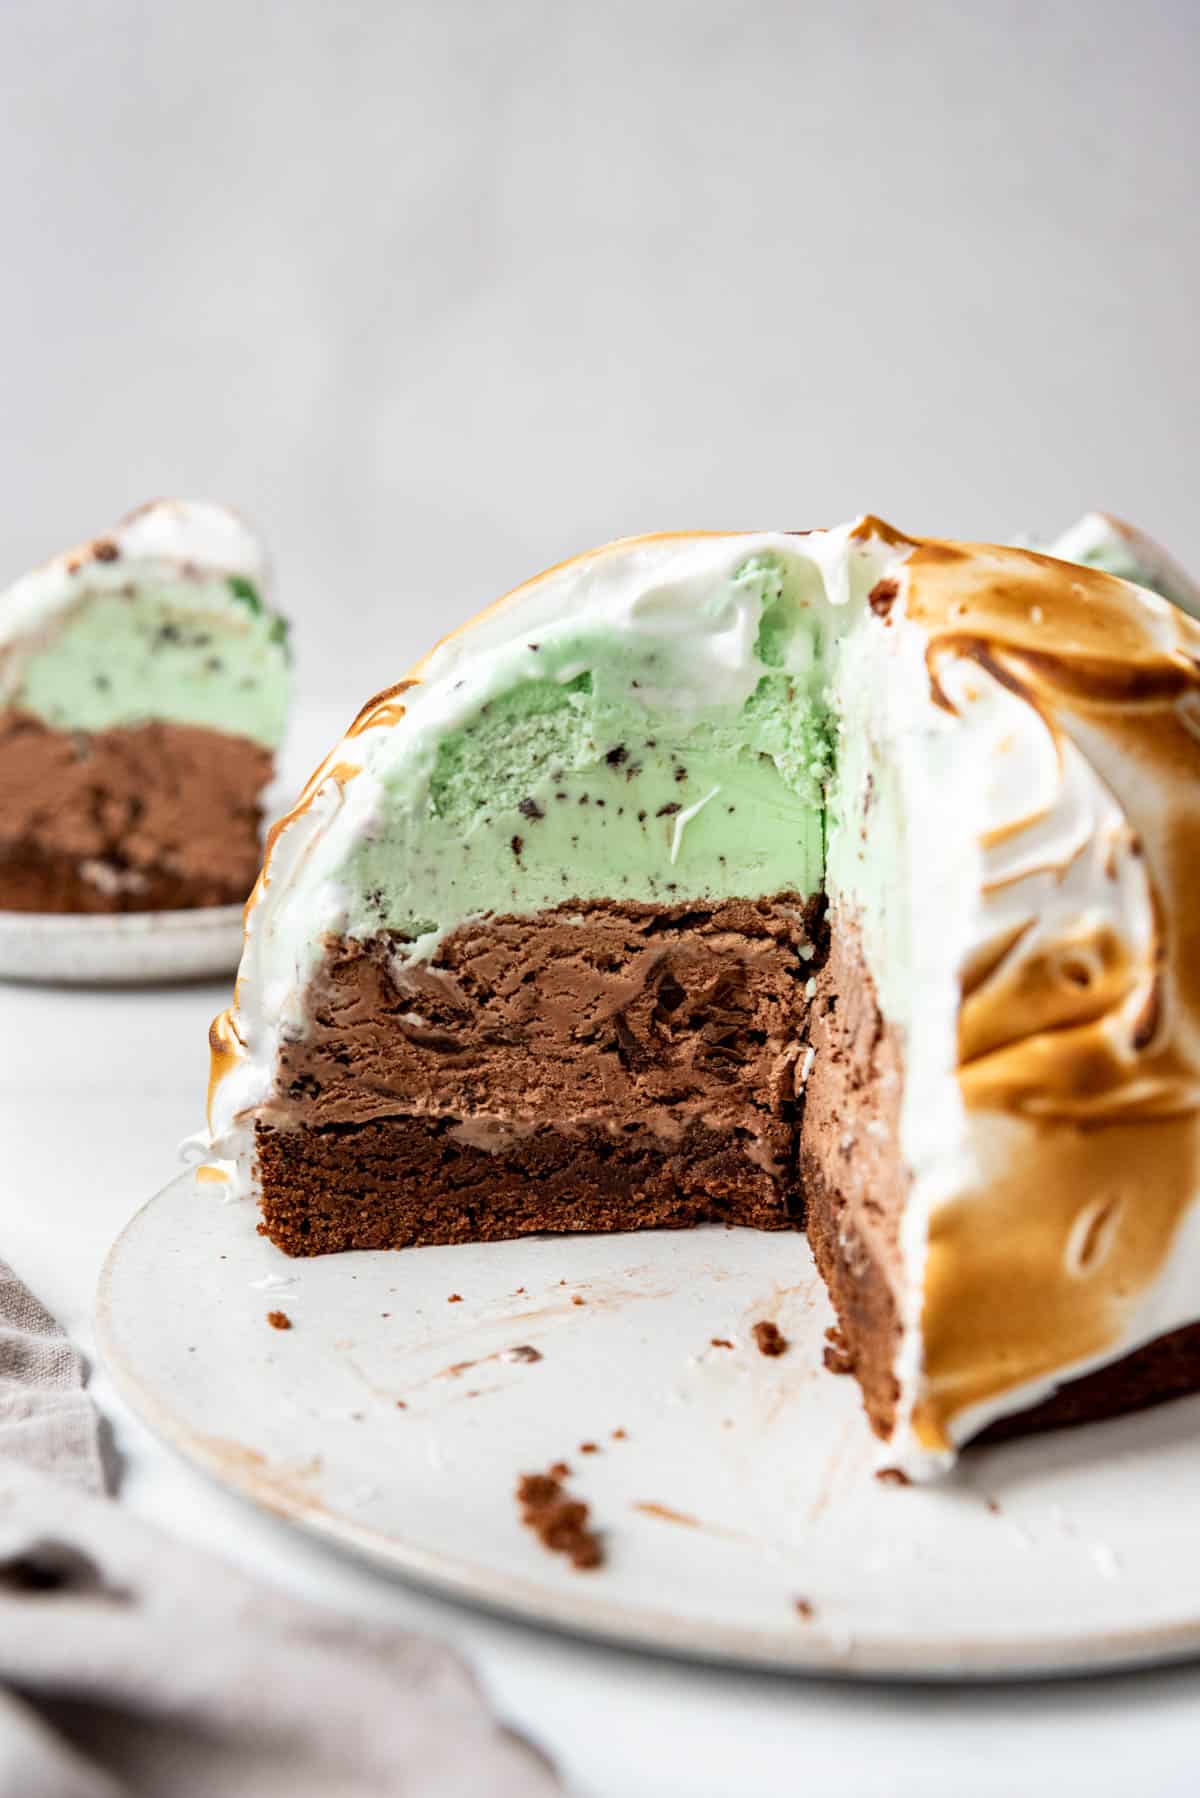 A baked Alaska with layers of brownie, chocolate and mint chip ice creams.